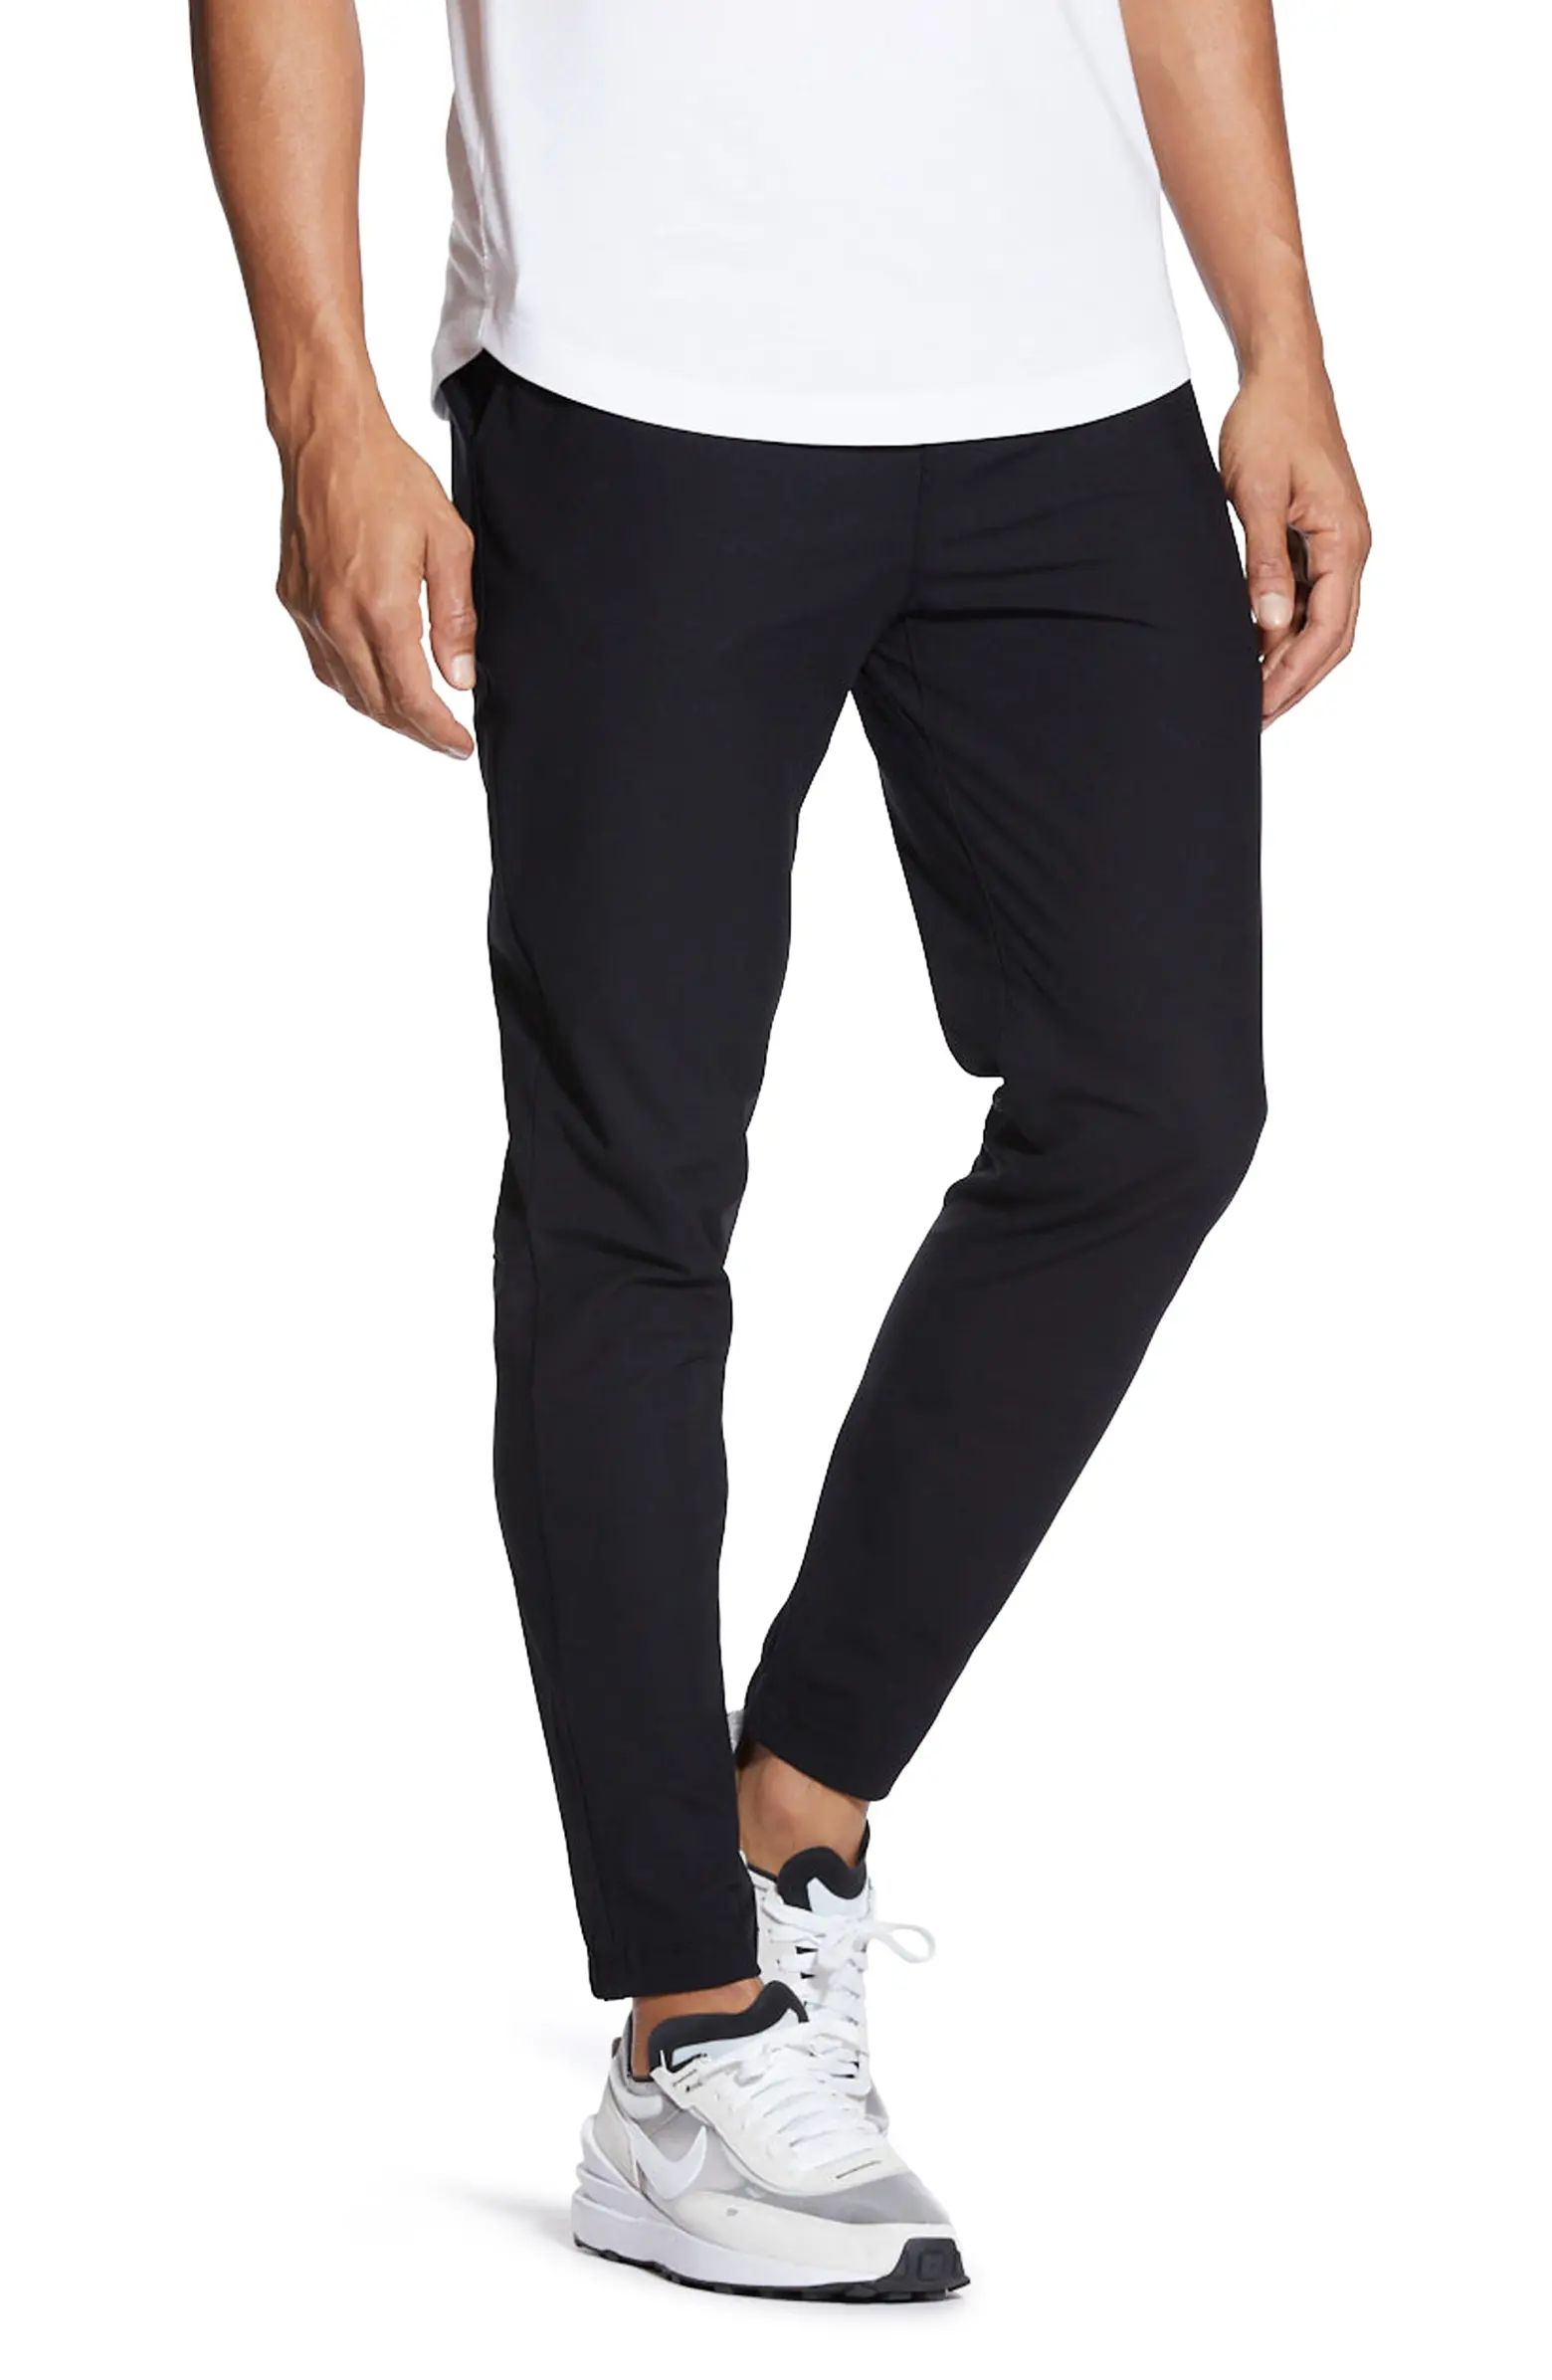 AO Slim Fit Performance Joggers | Nordstrom